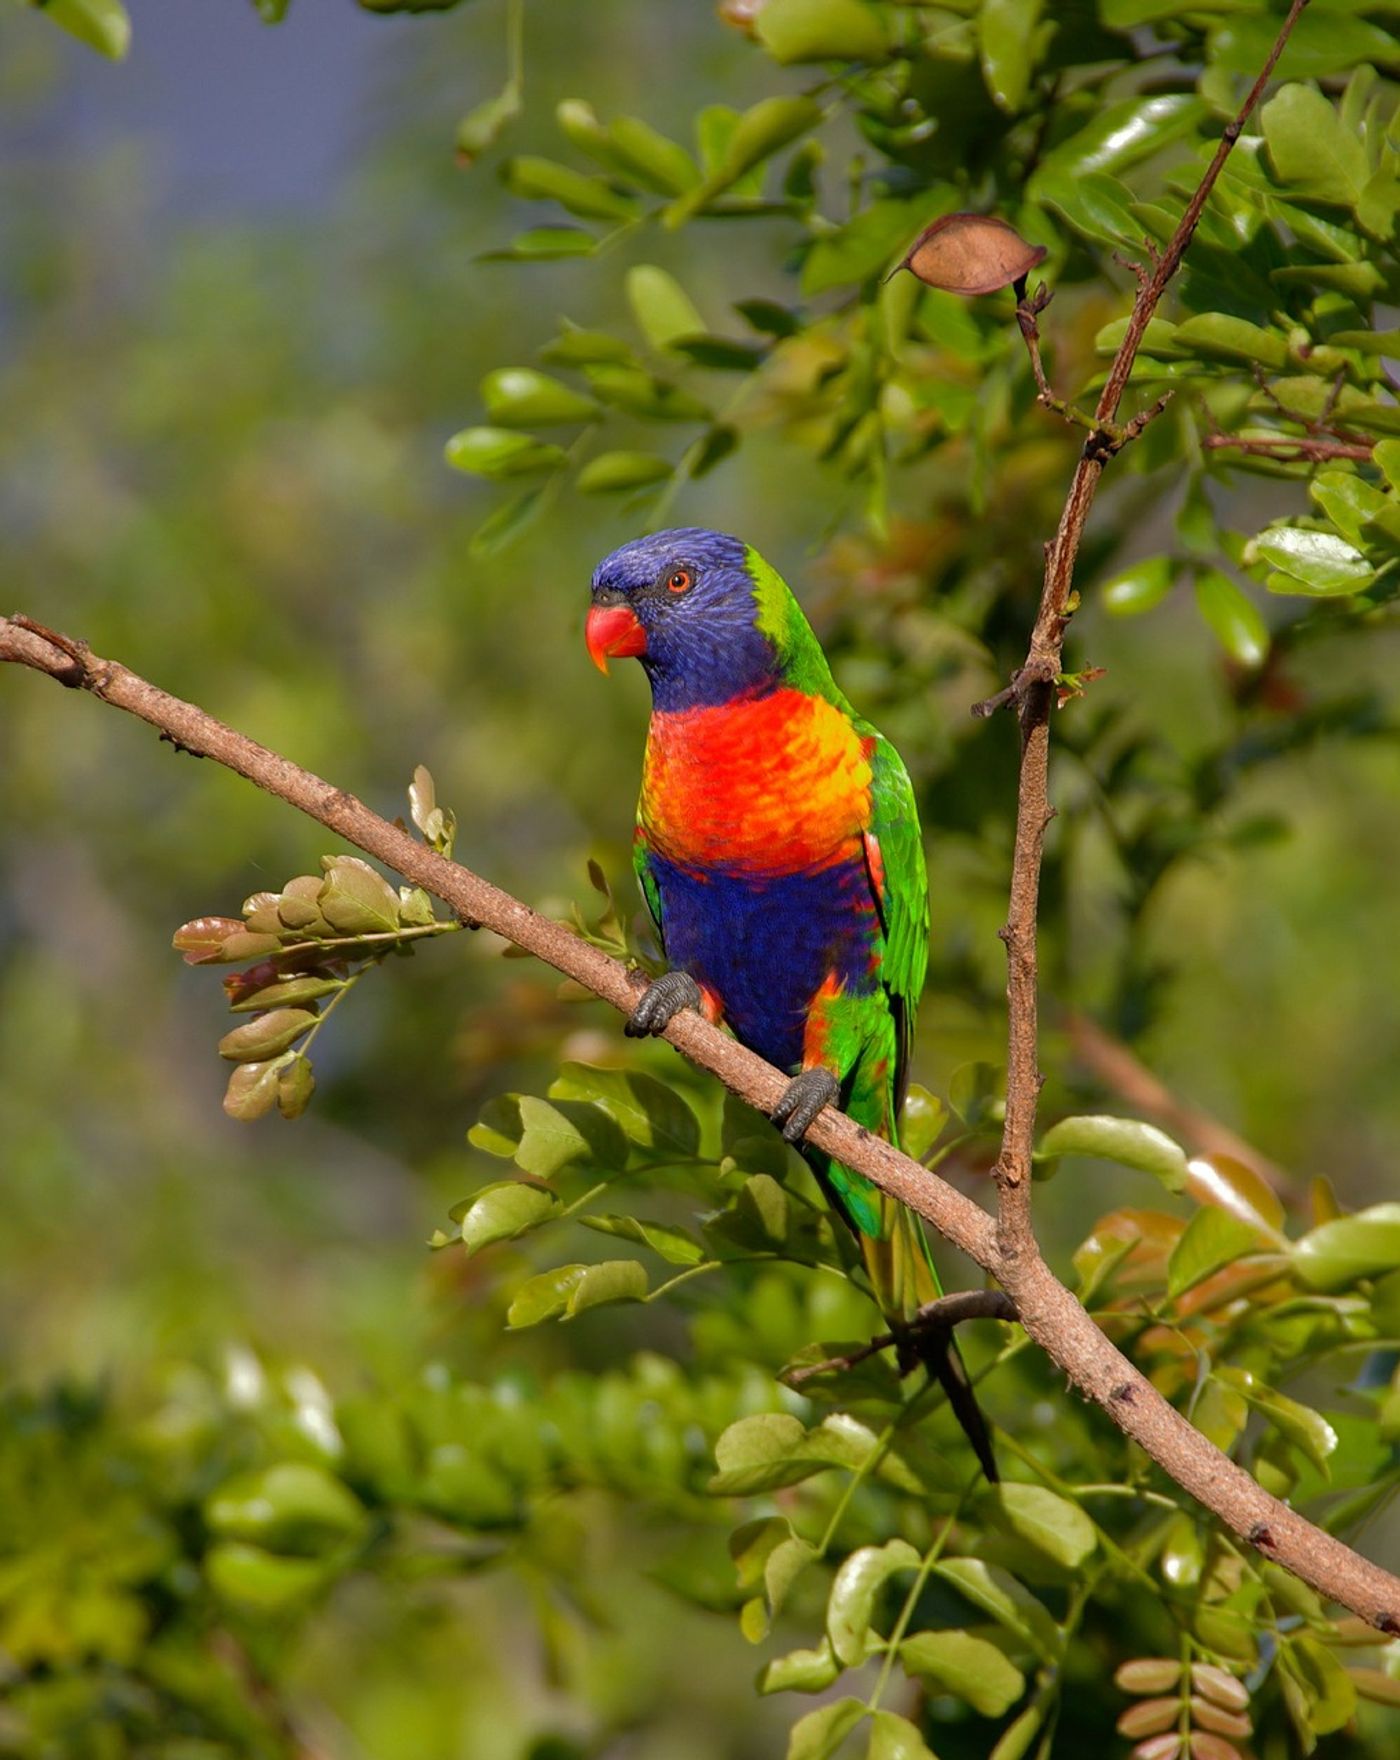 Parrots from Peru are just one of the types of animals known to partake in geophagy.